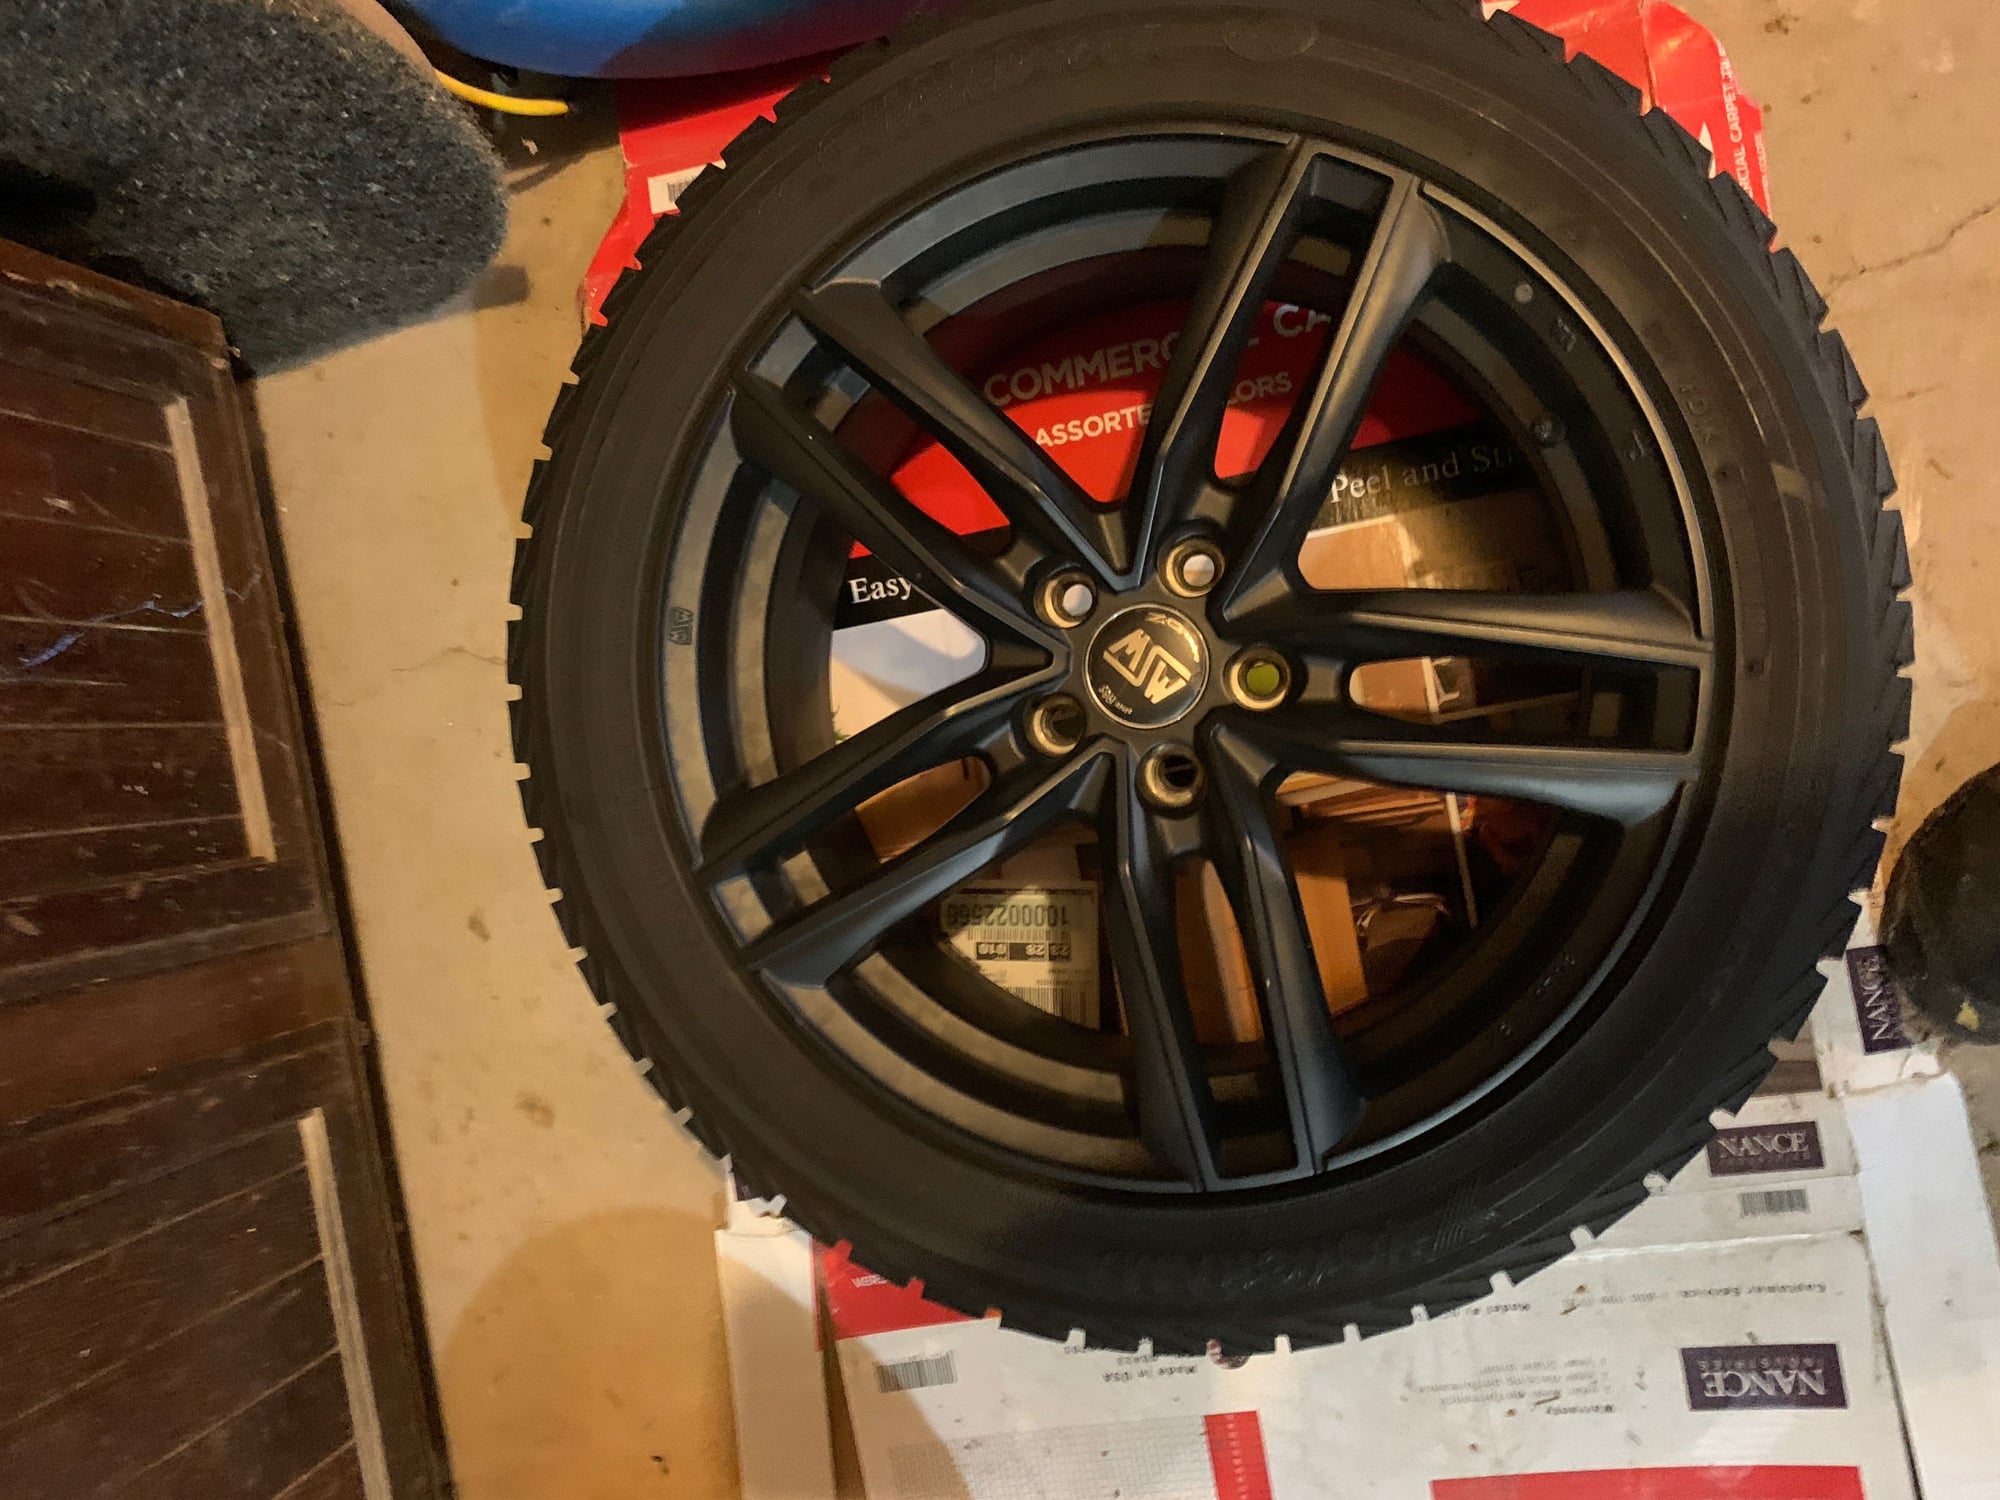 Wheels and Tires/Axles - XF Winter rims and tires - Used - 2009 to 2014 Jaguar XF - Syracuse, NY 13211, United States